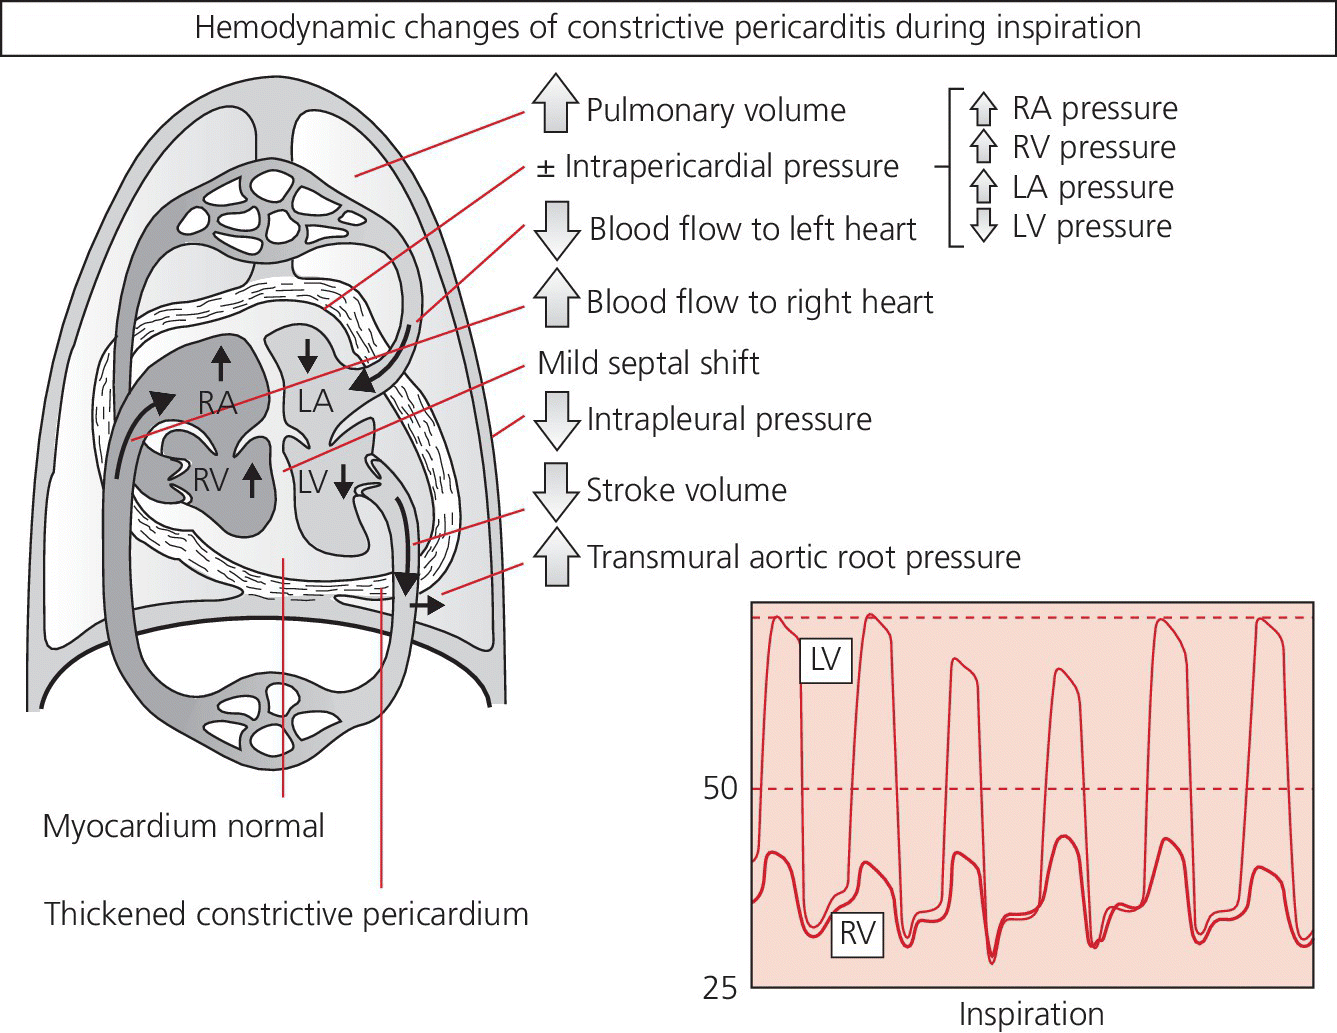 Left: Illustration displaying the effect of respiration on blood flow in mild constrictive pericarditis labeled RA pressure, RV pressure, LA pressure, etc.  Right: Graph displaying waves labeled LV and RV.